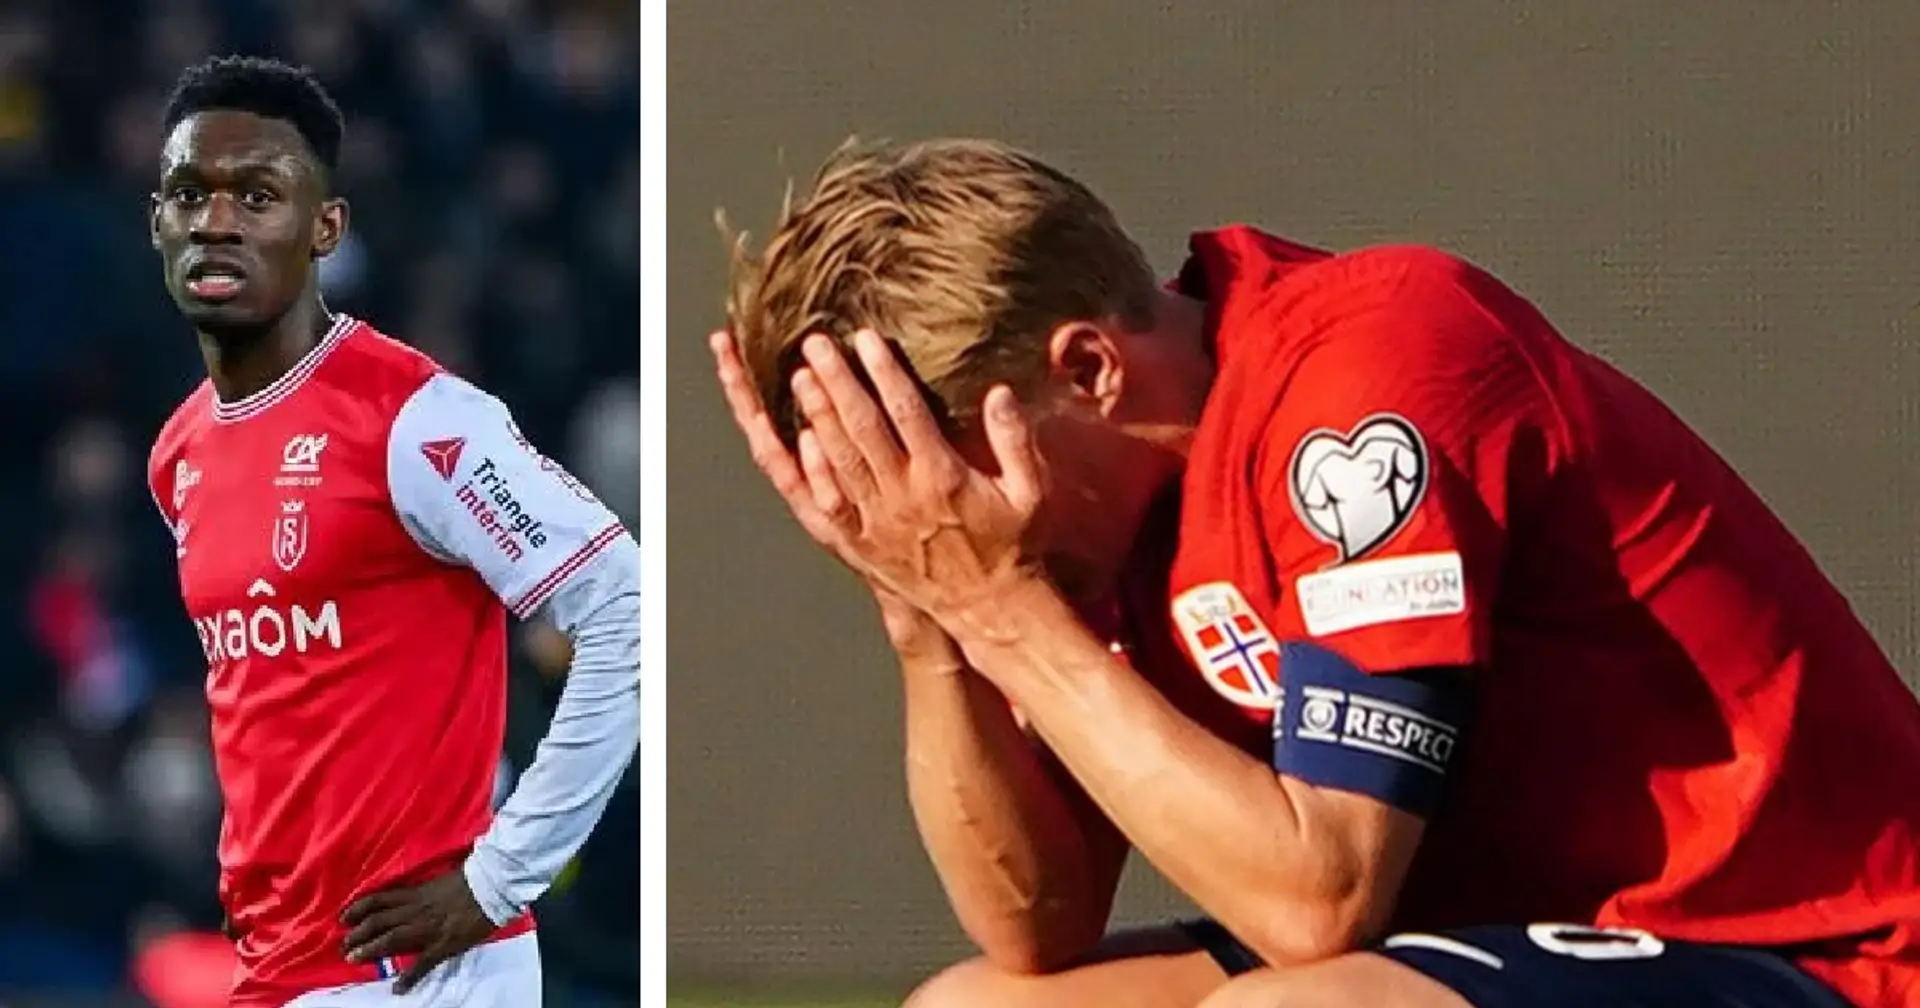 Odegaard fumes after defeat with Norway & 2 more under-radar Arsenal stories 